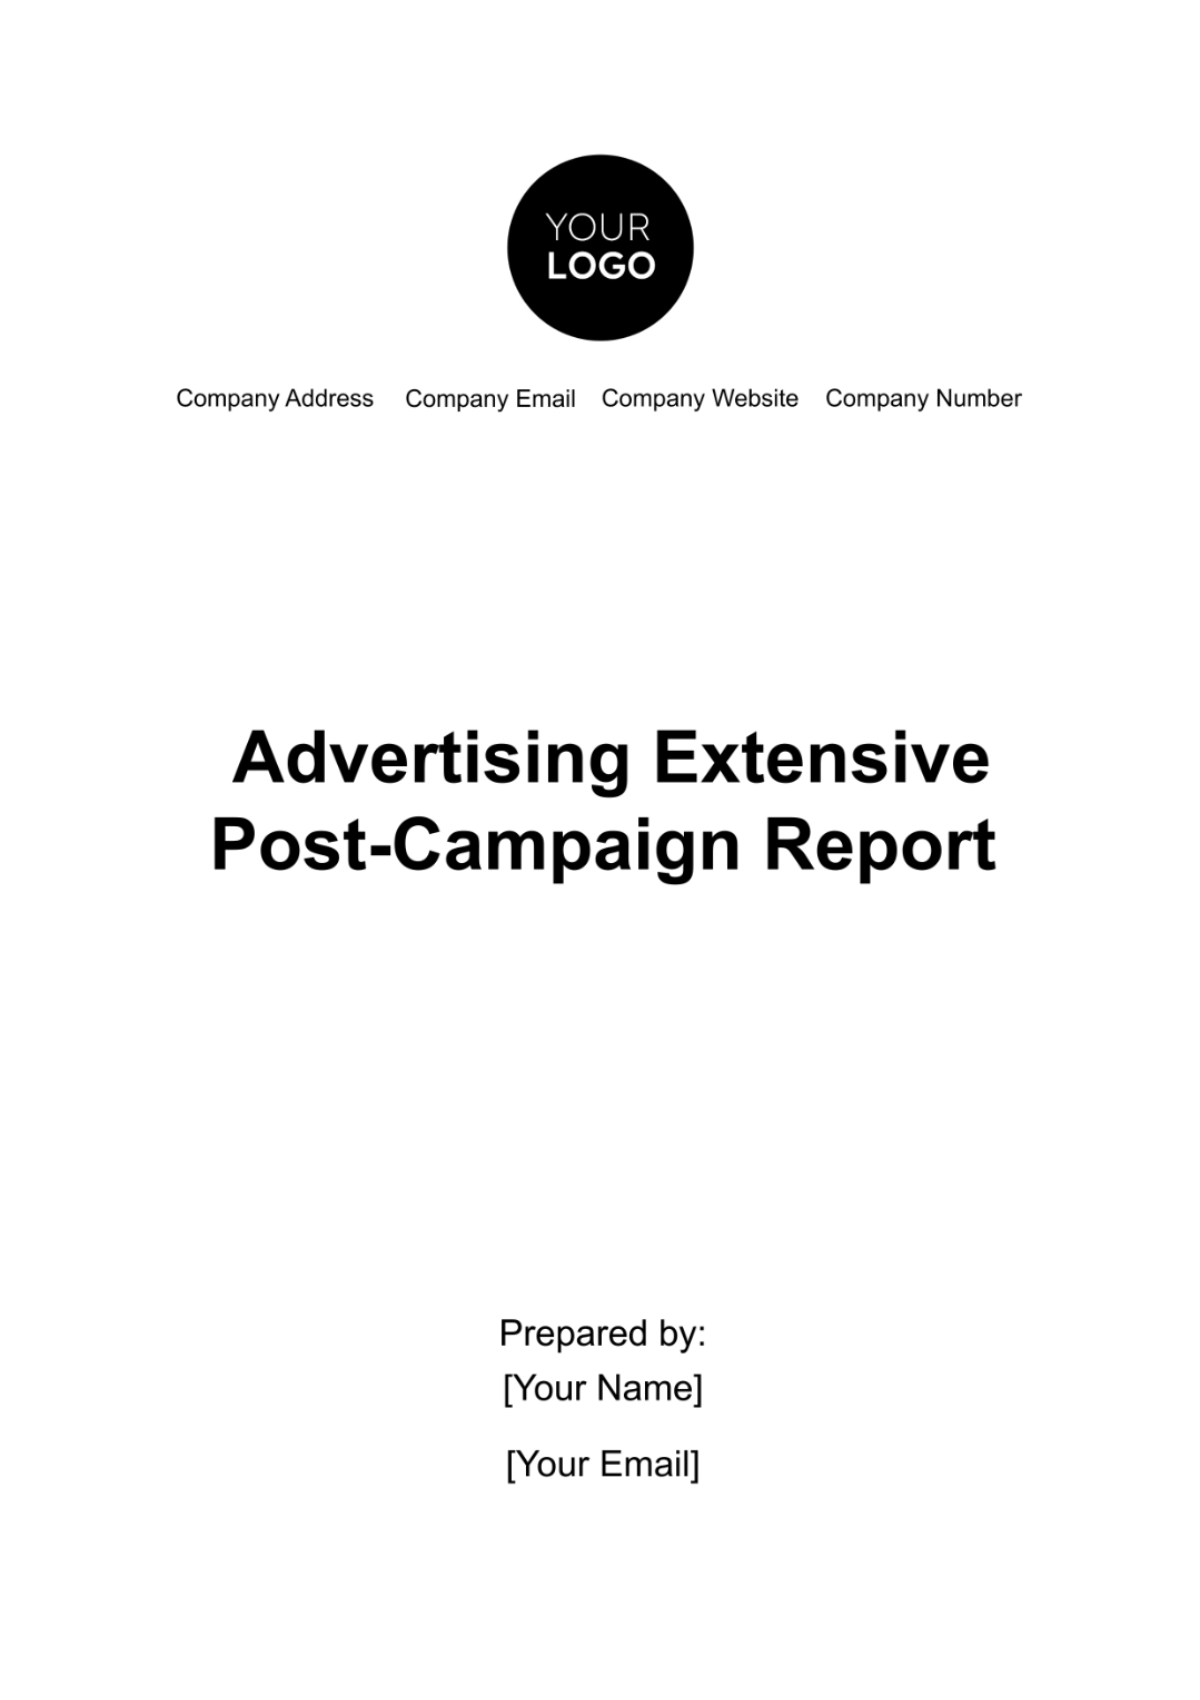 Advertising Extensive Post-Campaign Report Template